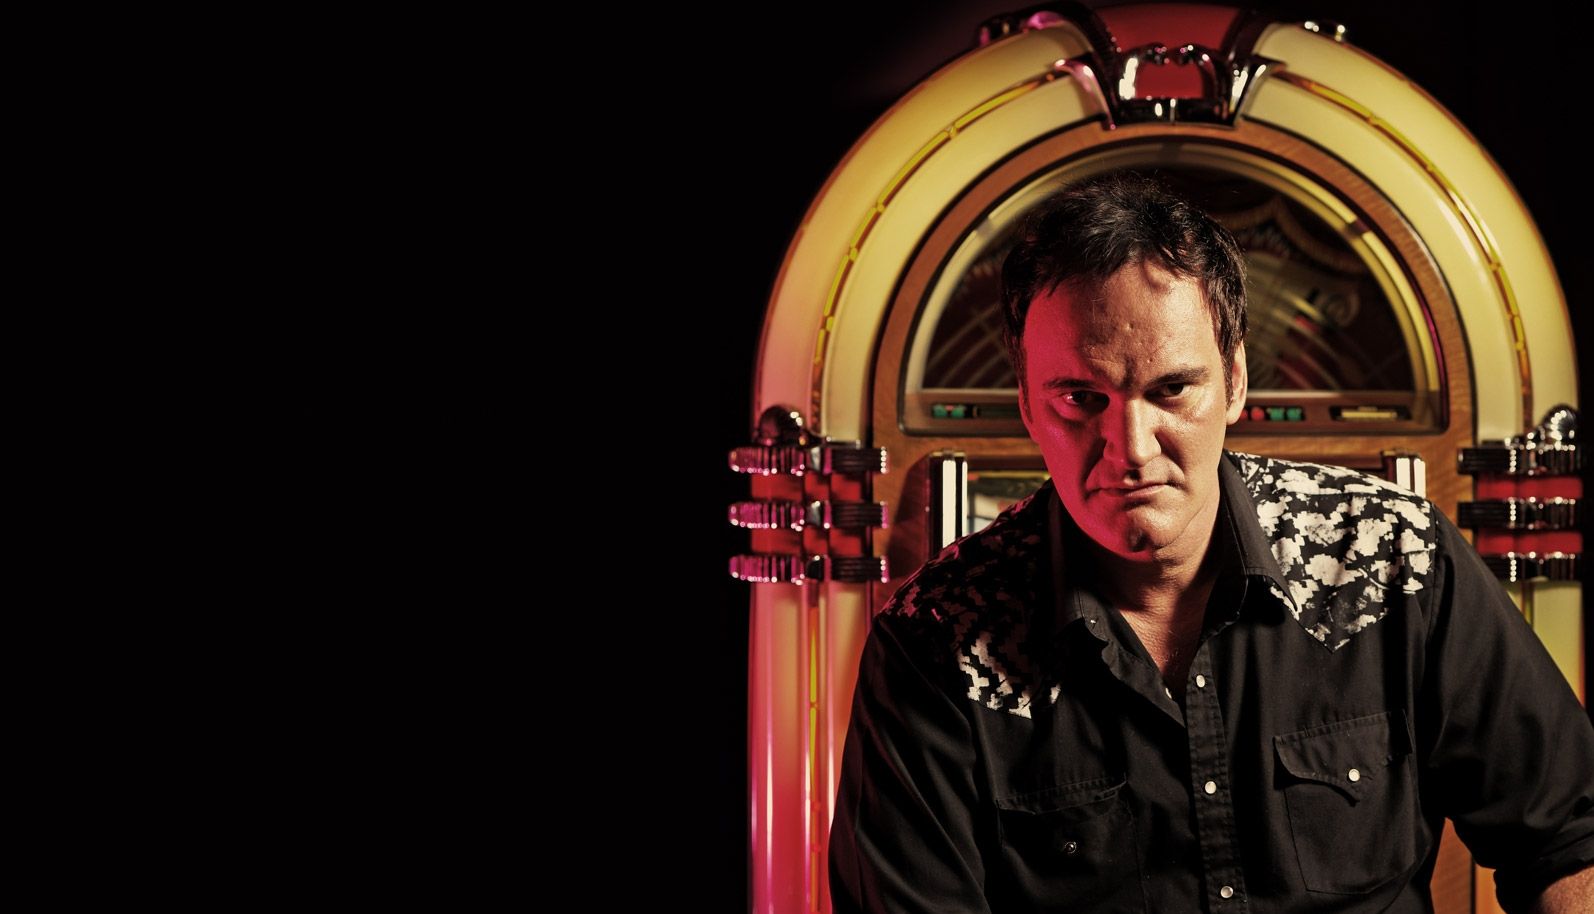 Tarantino shelves The Hateful Eight after script is leaked online